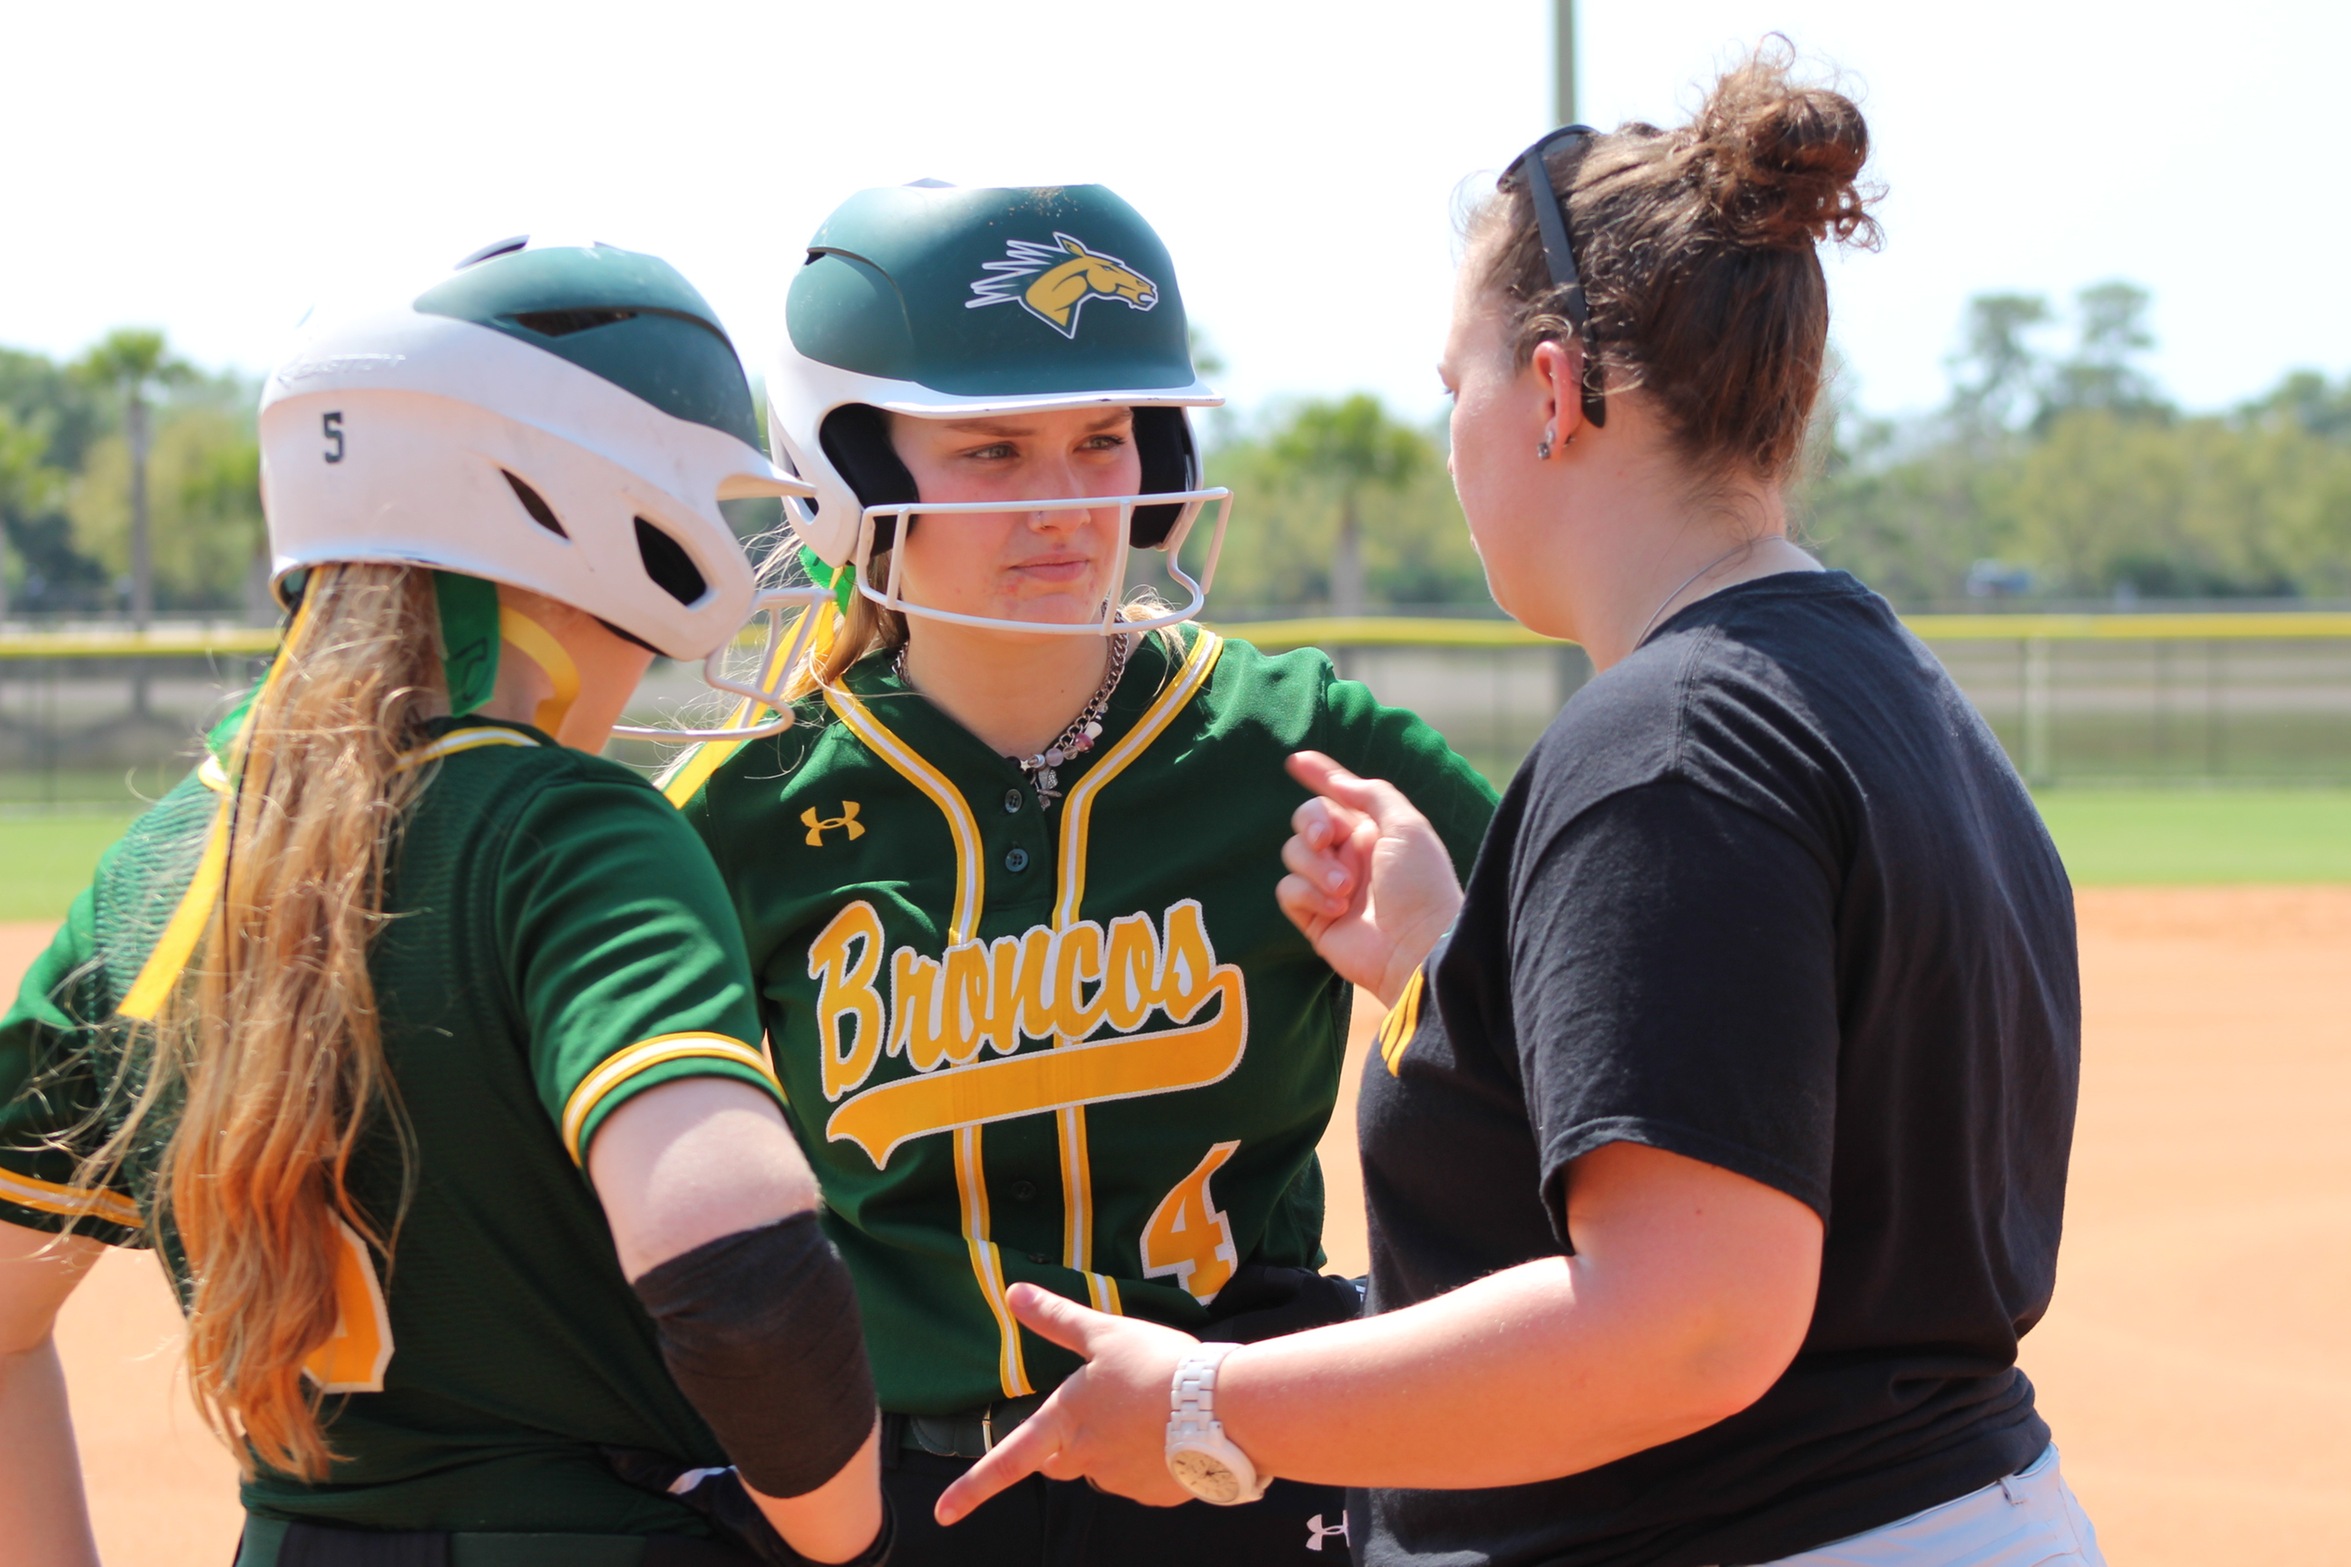 Softball Heads to Florida, Plays Against Rockford in 1st Game